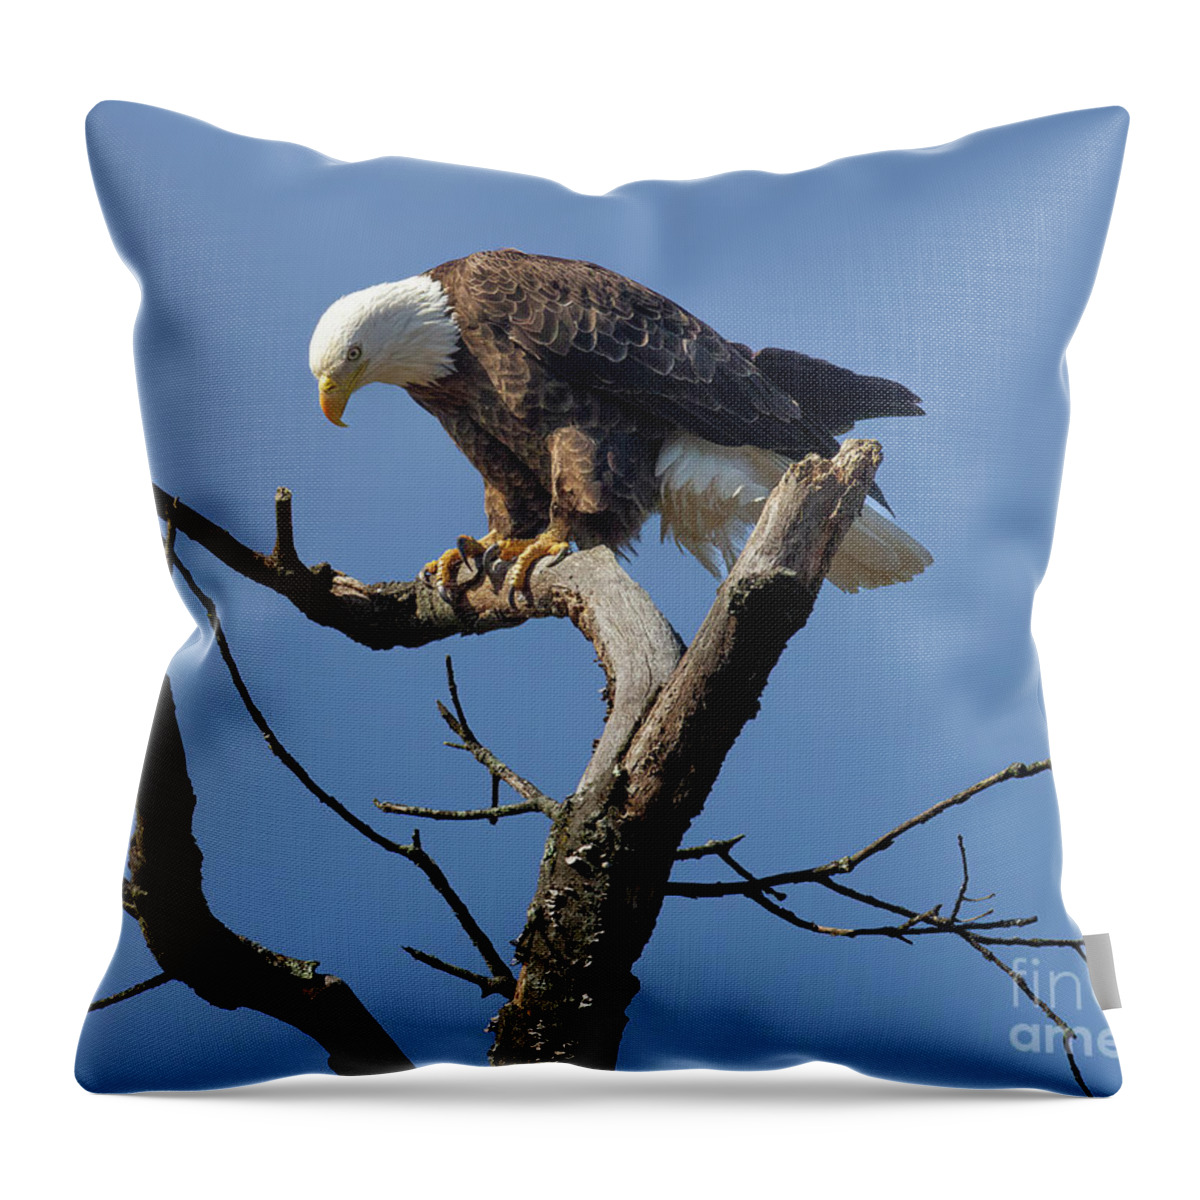 Eagles Throw Pillow featuring the photograph The Eagle Has Landed by Chris Scroggins